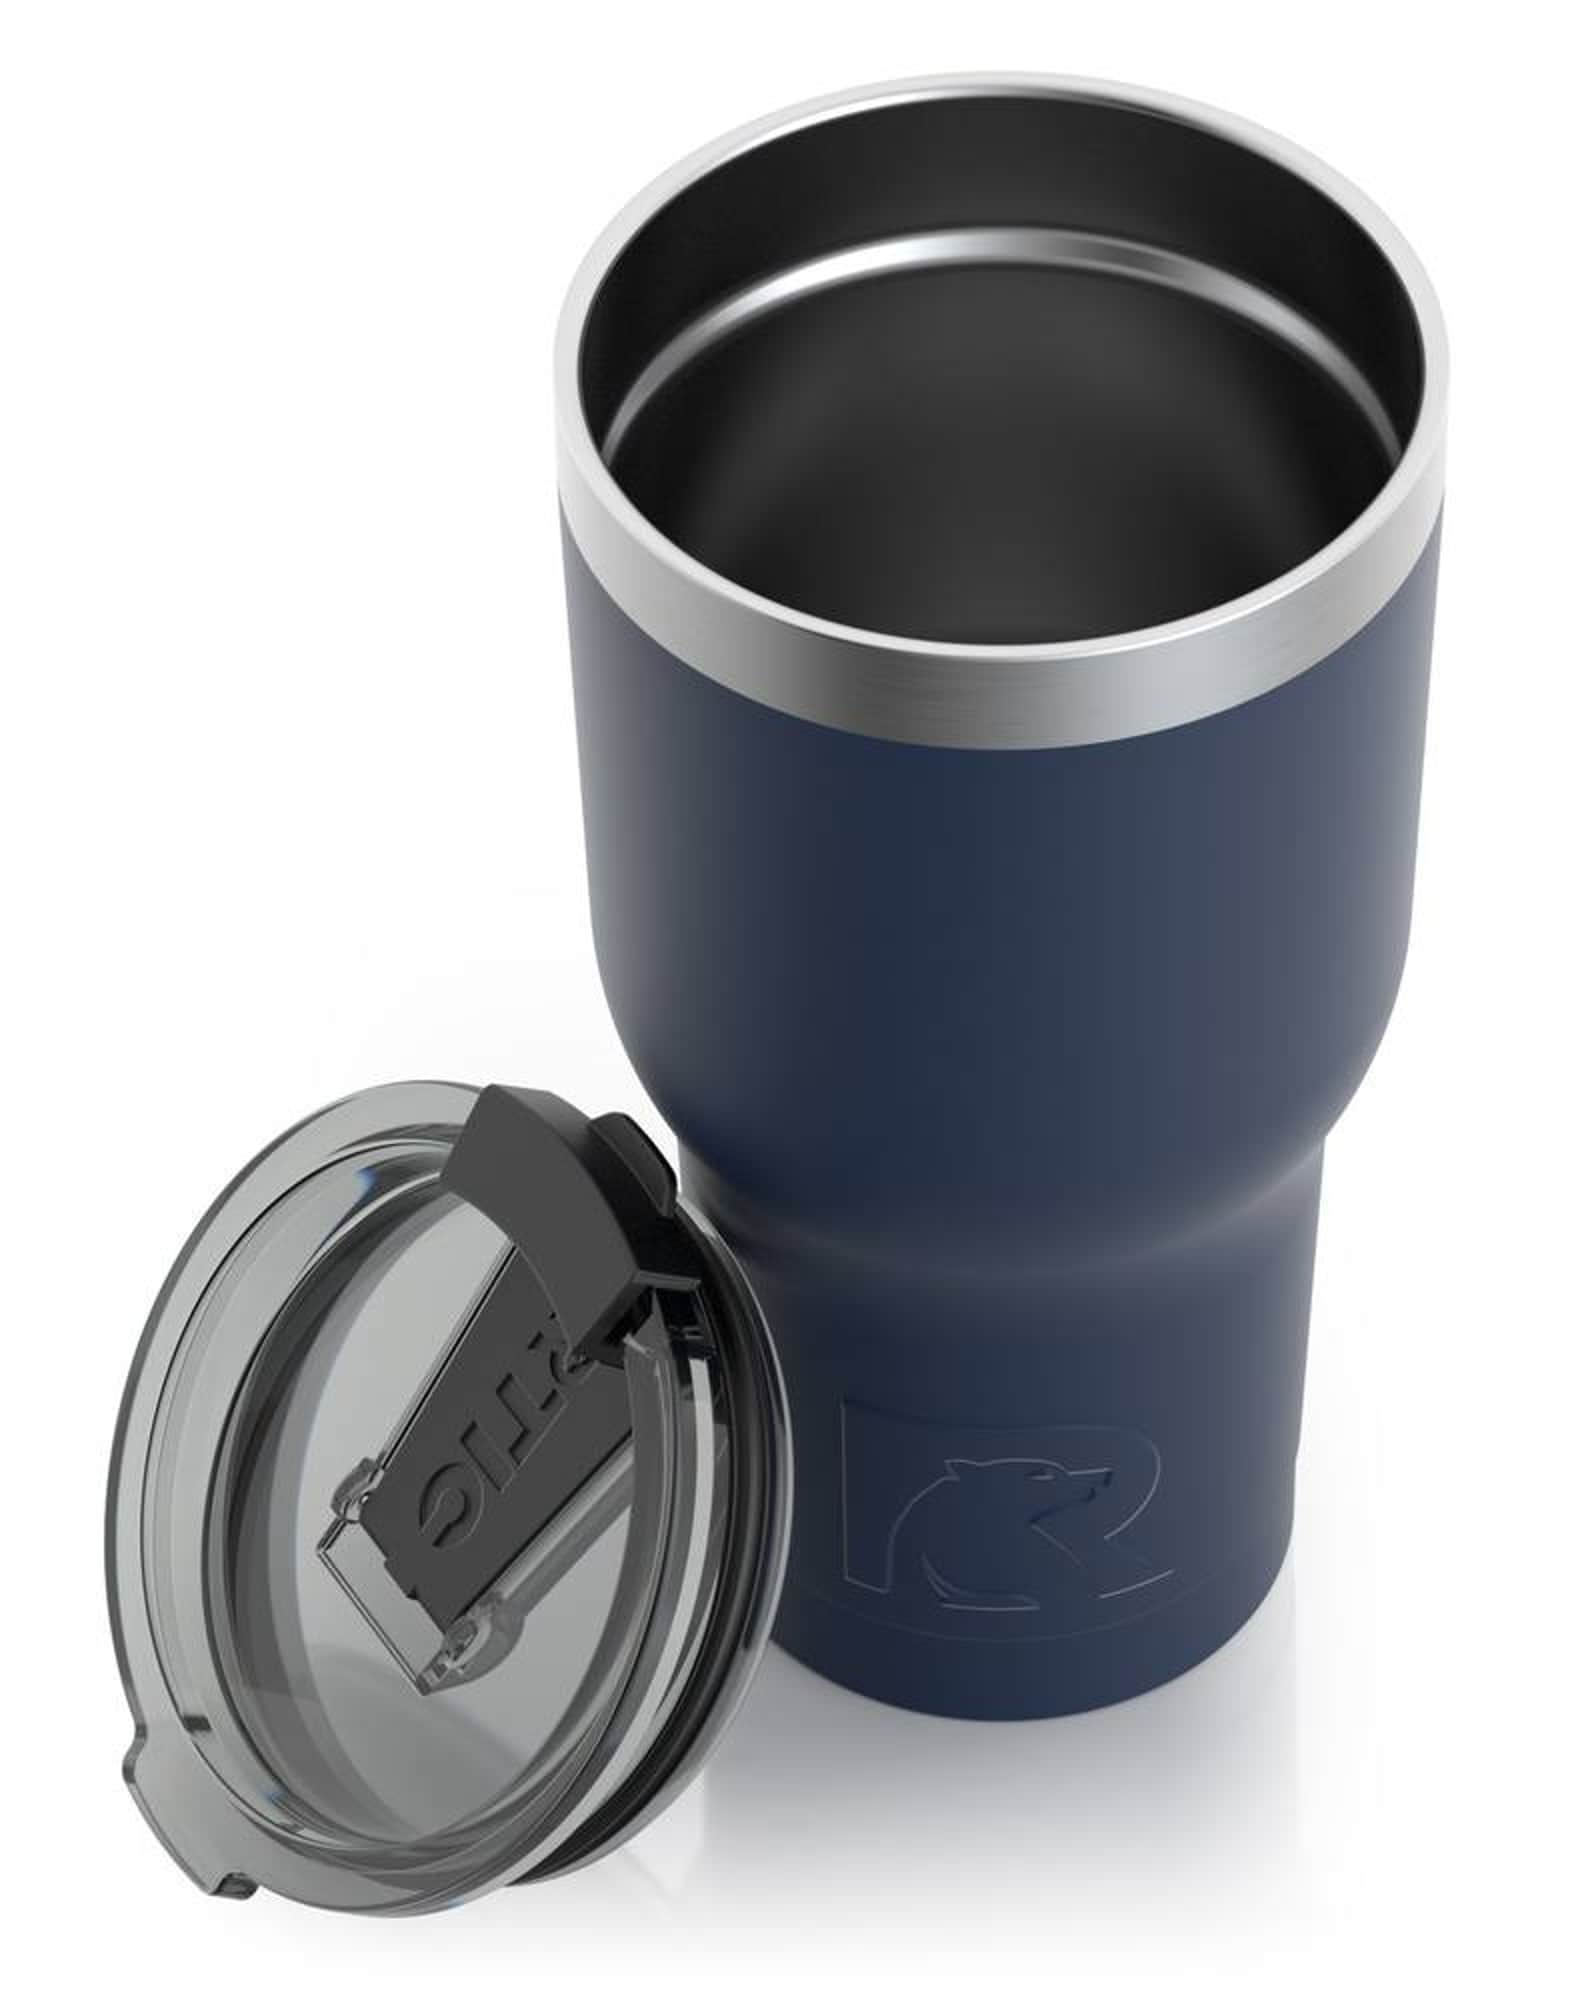 RTIC Outdoors Tumbler 20-fl oz Stainless Steel Insulated Tumbler